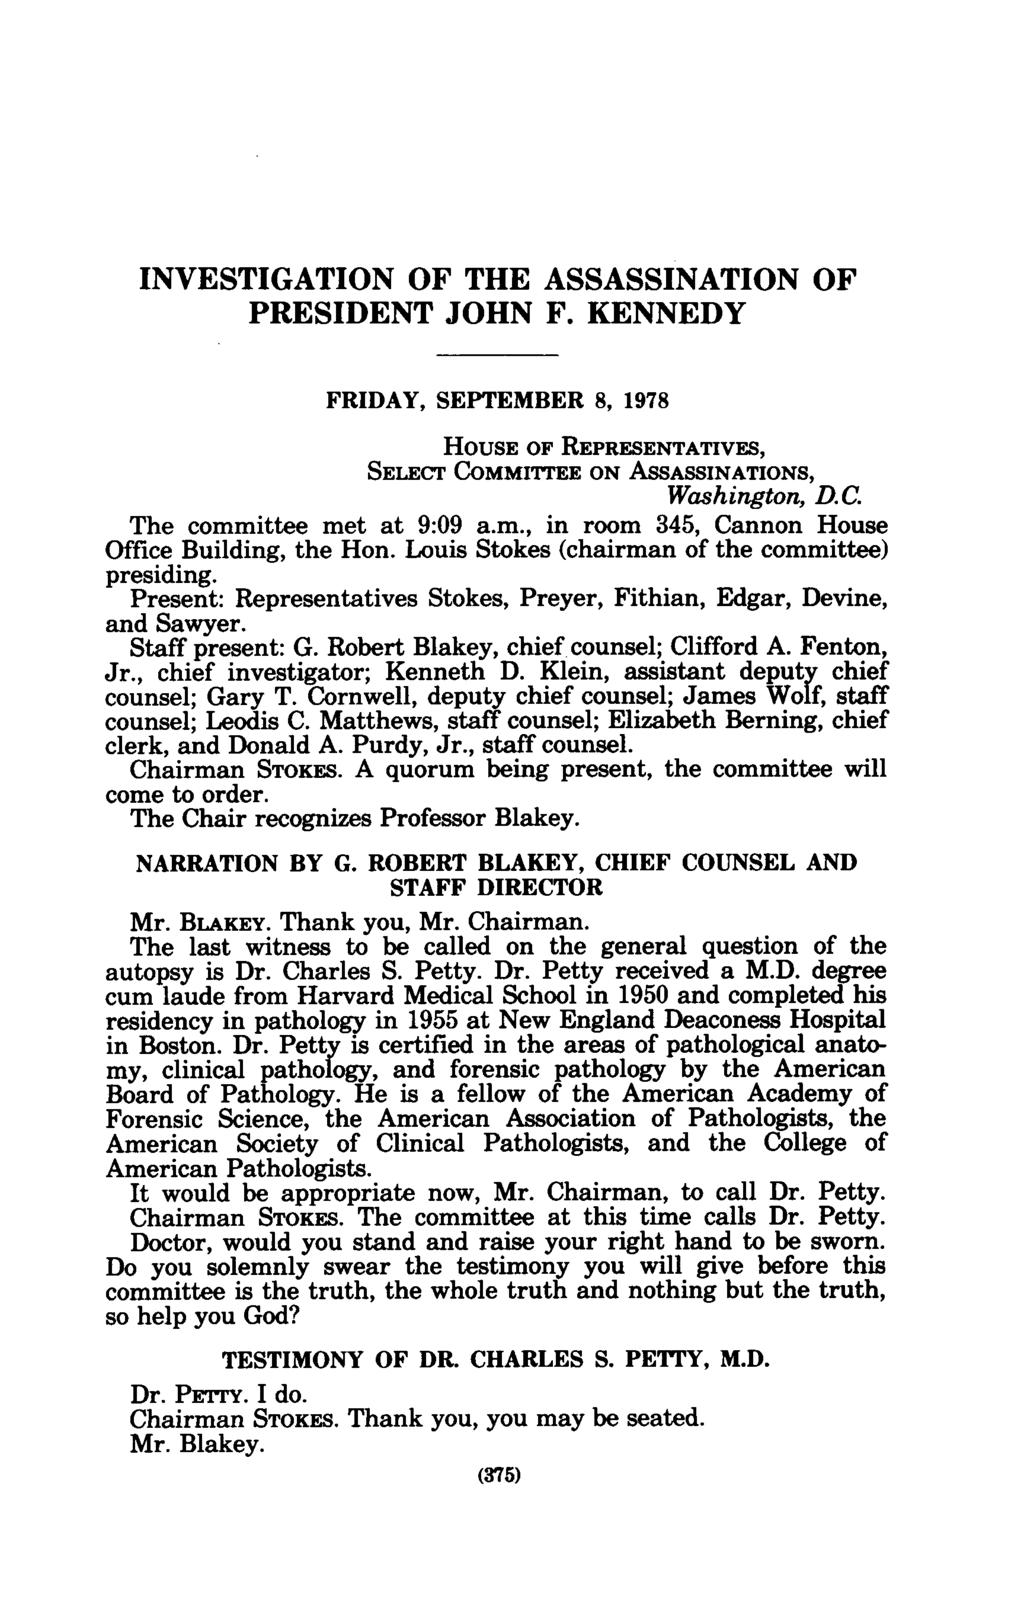 INVESTIGATION OF THE ASSASSINATION OF PRESIDENT JOHN F. KENNEDY FRIDAY, SEPTEMBER 8, 1978 HOUSE OF REPRESENTATIVES, SELECT COMMITTEE ON ASSASSINATIONS, Washington, D.C. The comm